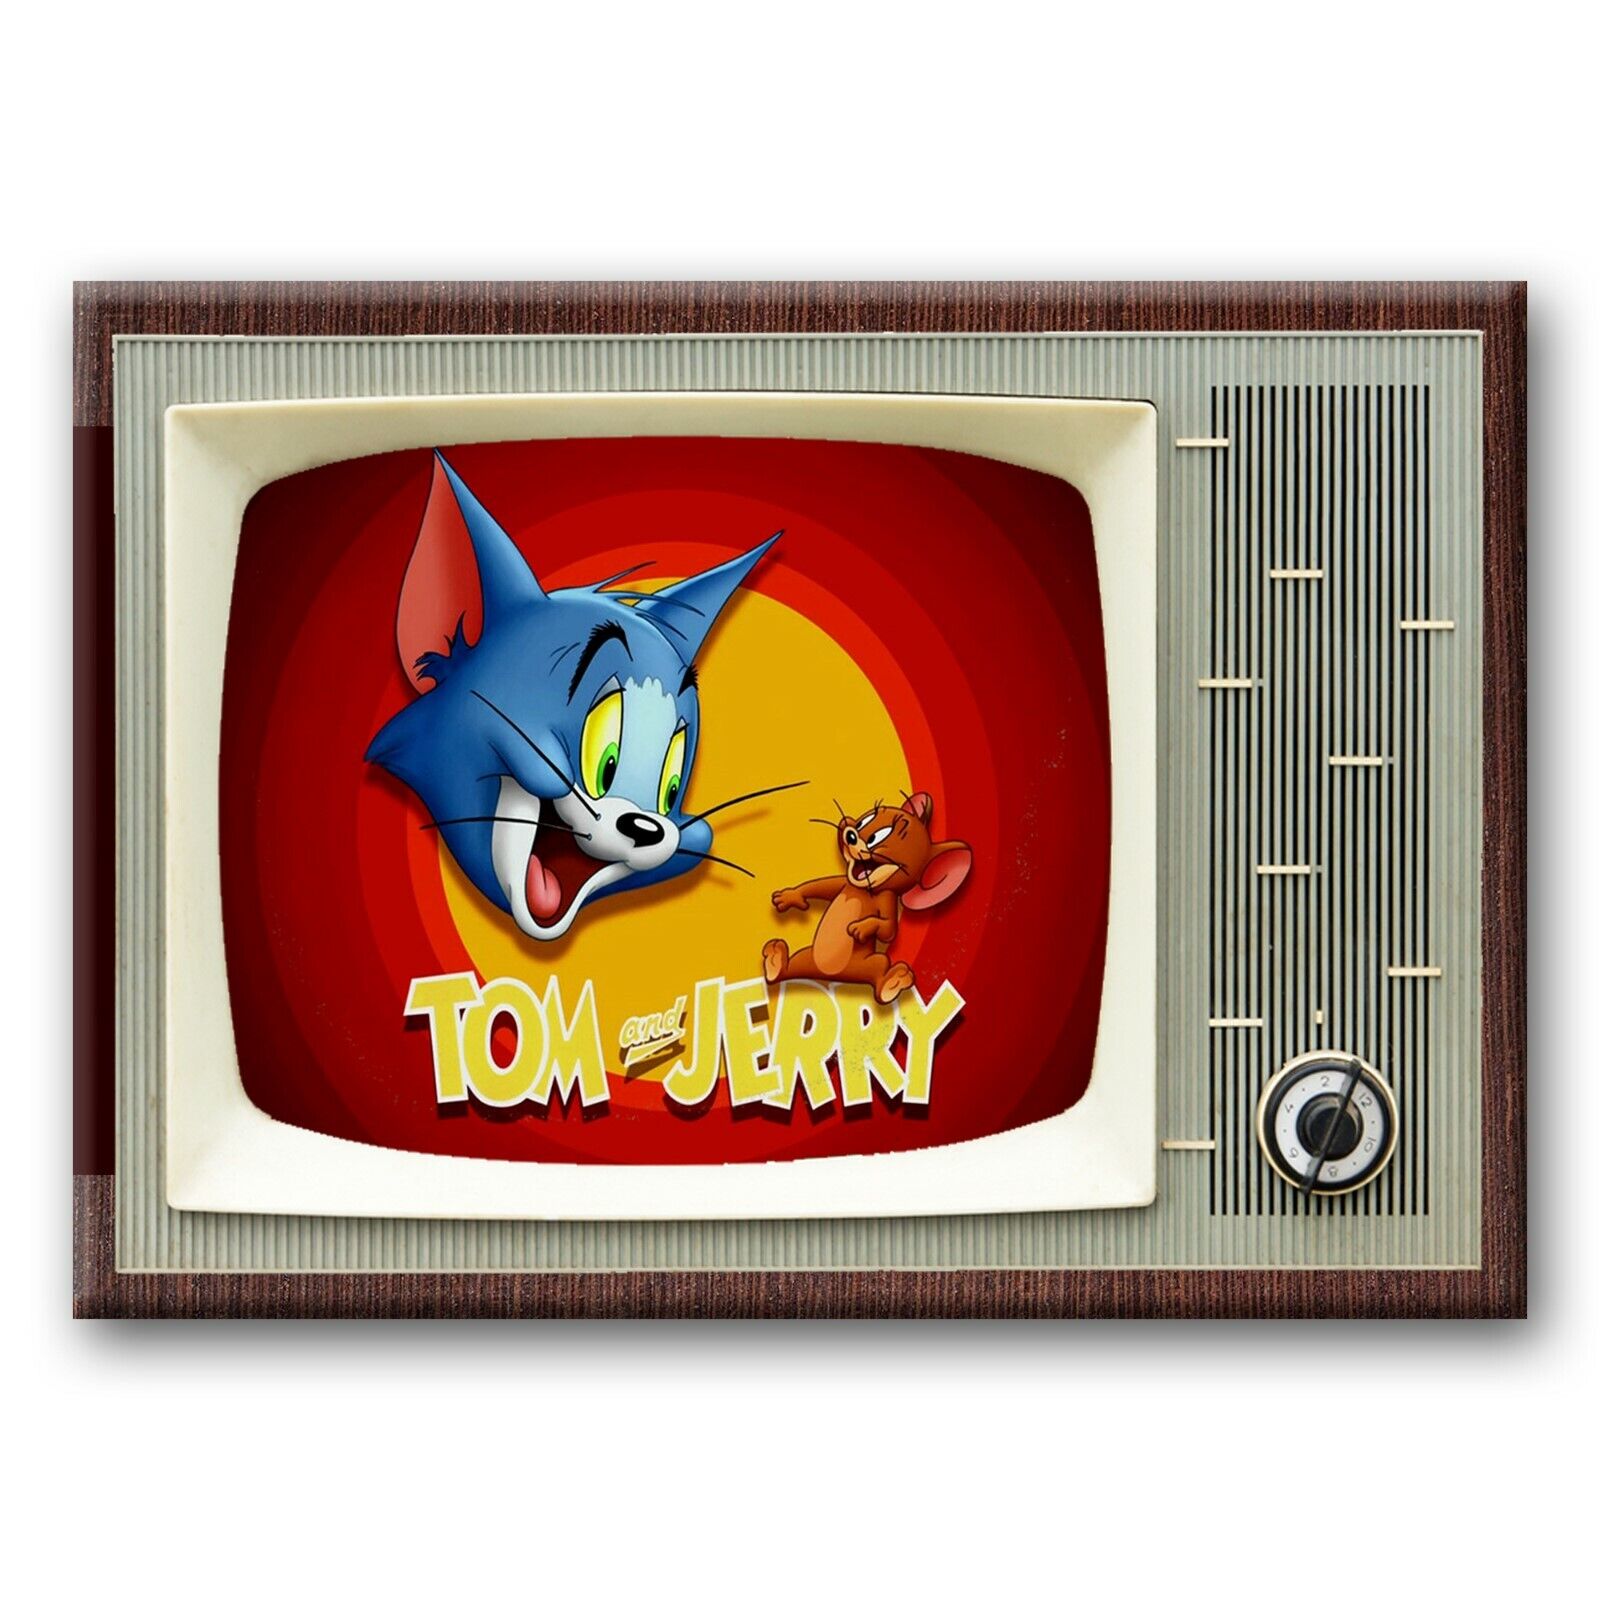 TOM & JERRY TV 3.5 inches x 2.5 inches FRIDGE MAGNET